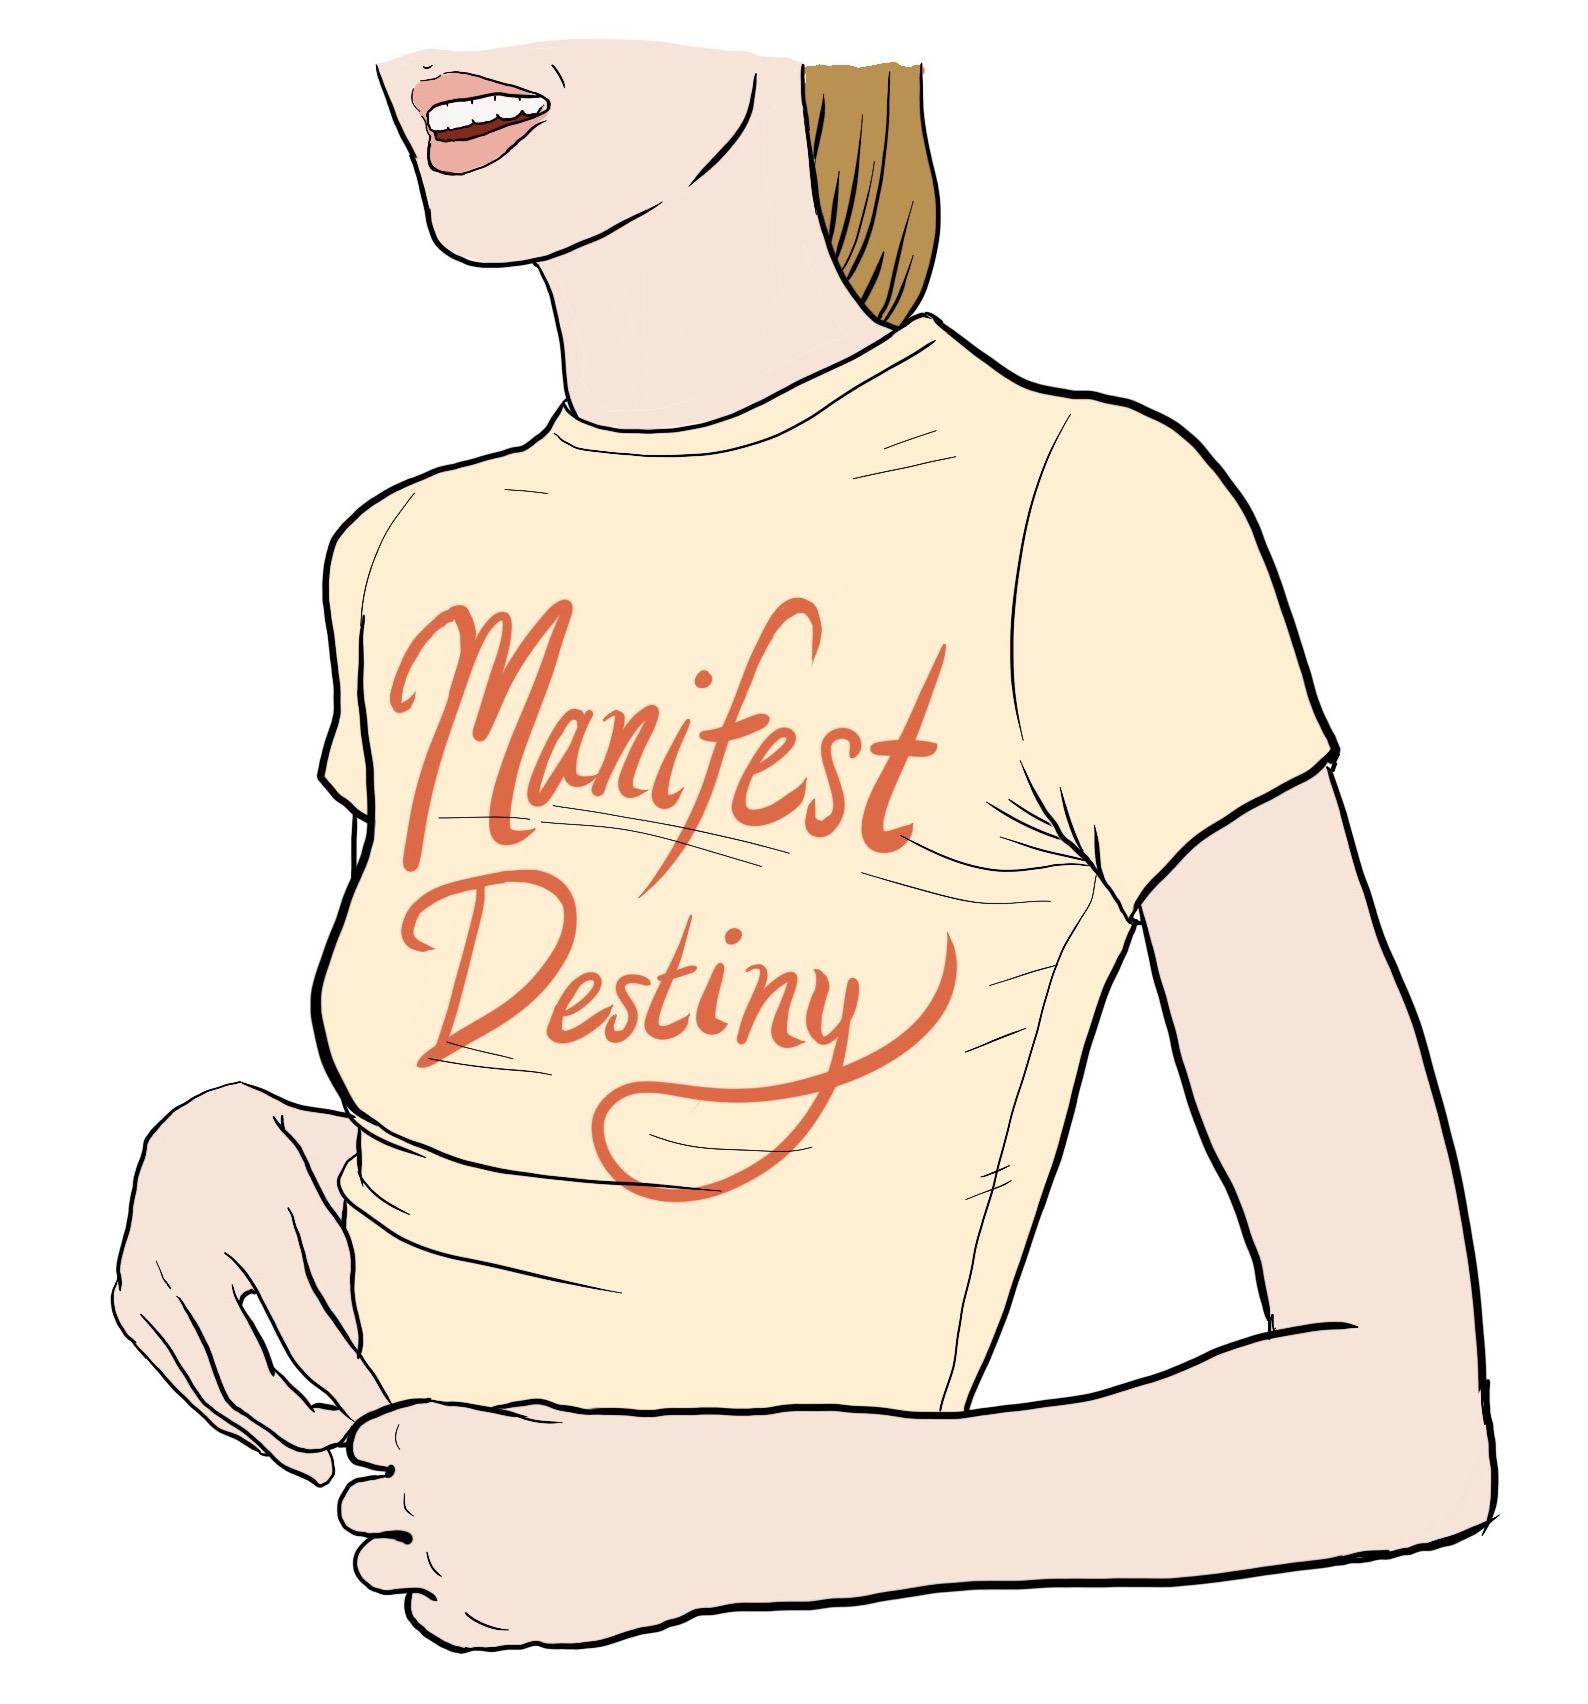 White disillusioned girl wearing a yellow "Manifest Destiny" shirt